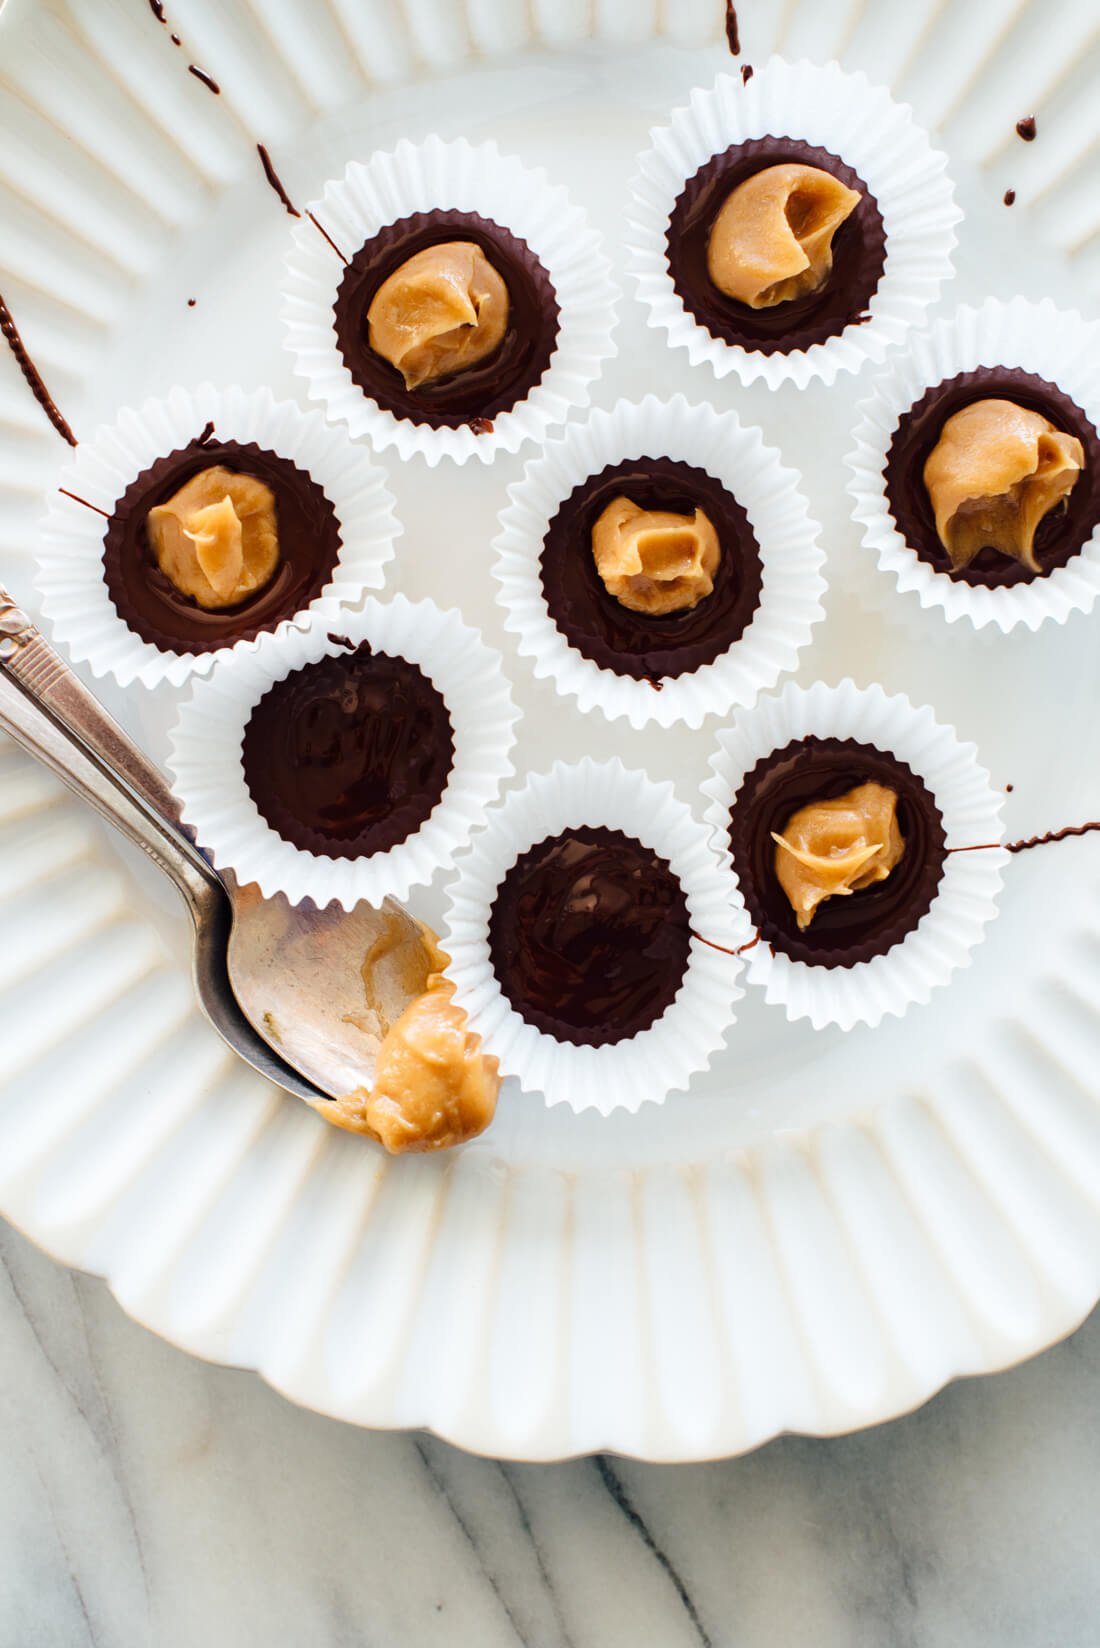 How to make mini peanut butter cups